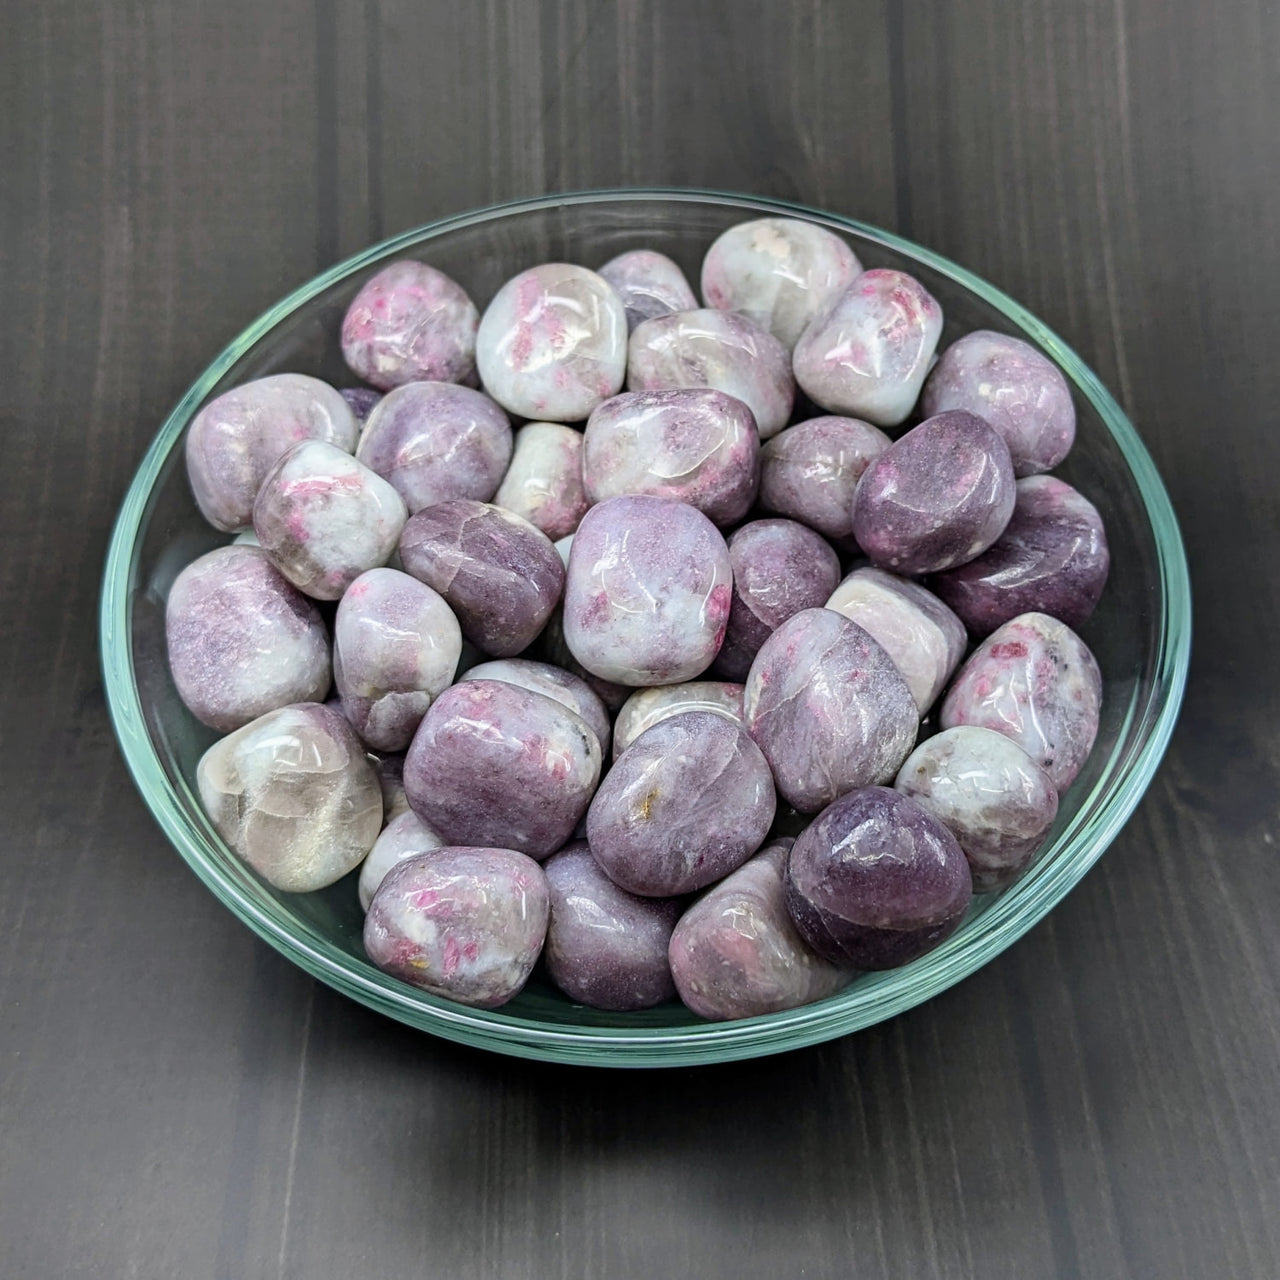 A bowl of purple marble eggs from Bliss Crystals’ Pink Tourmaline & Quartz collection